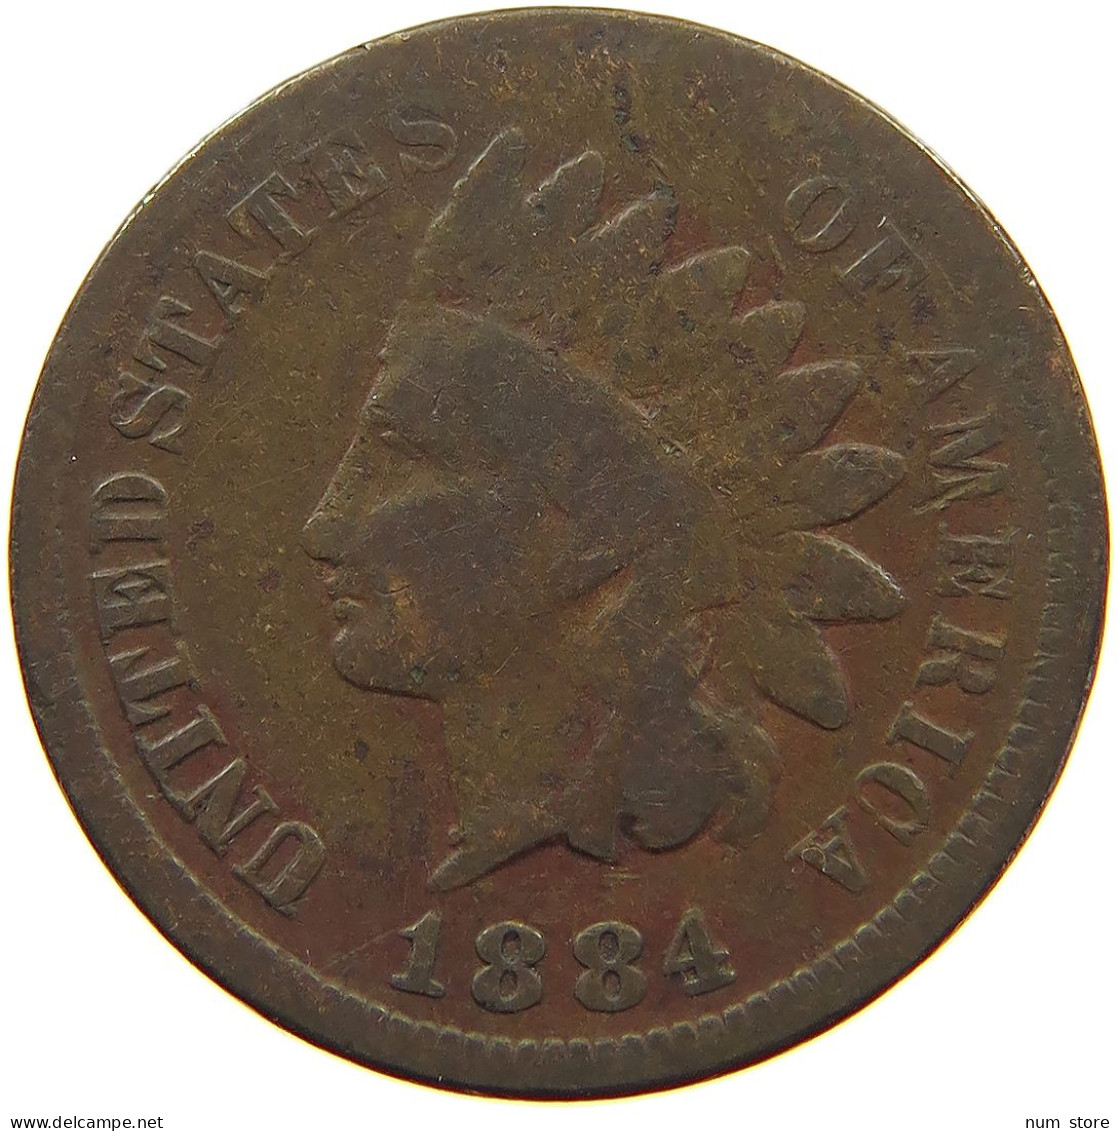 UNITED STATES OF AMERICA CENT 1884 INDIAN HEAD #s063 0429 - 1859-1909: Indian Head